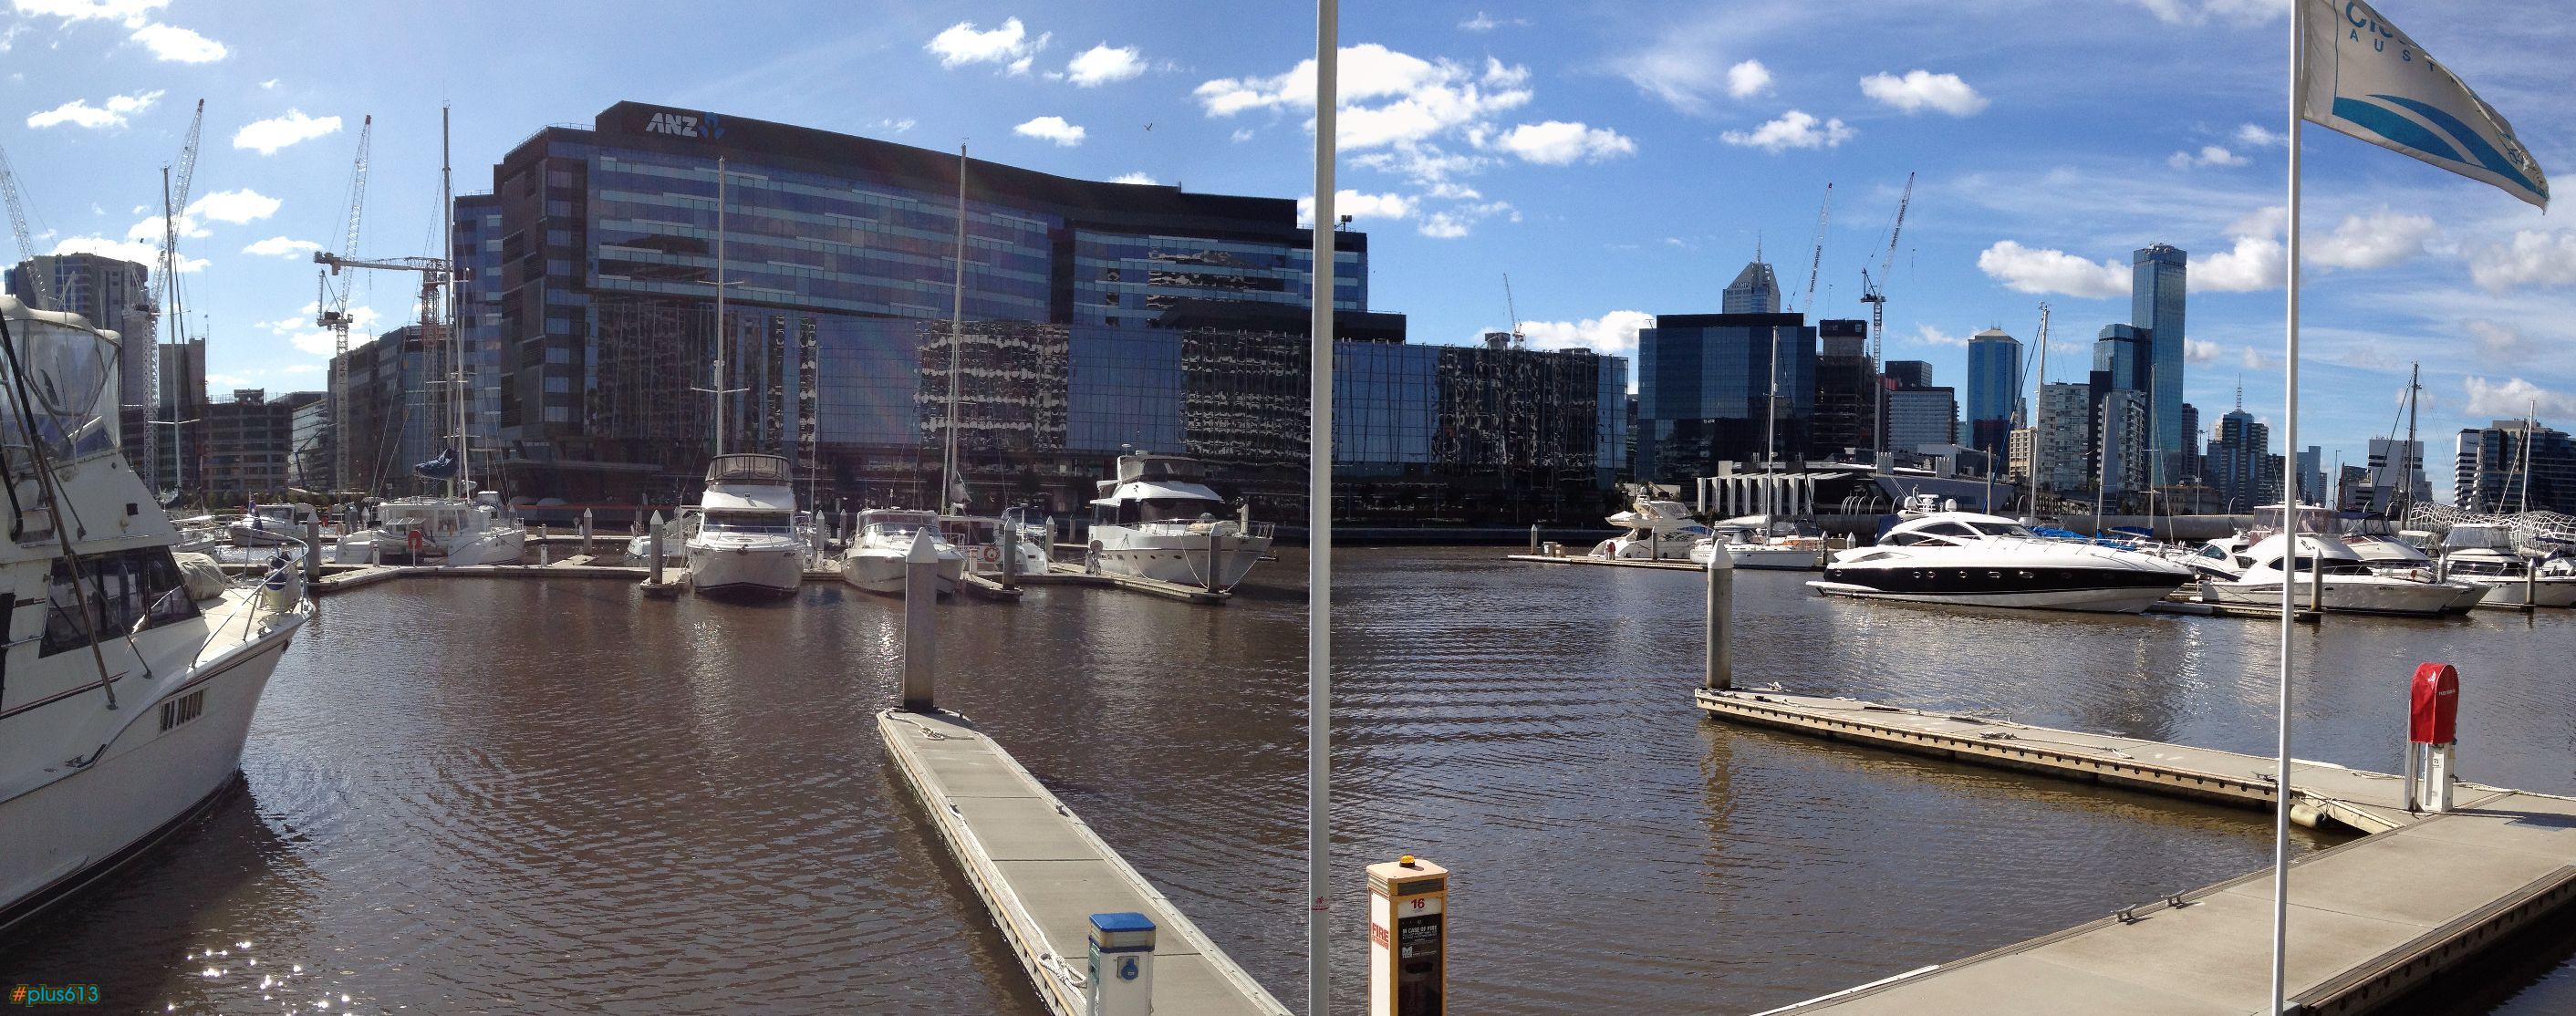 Melbourne (Docklands) from the Yarra River - full pic